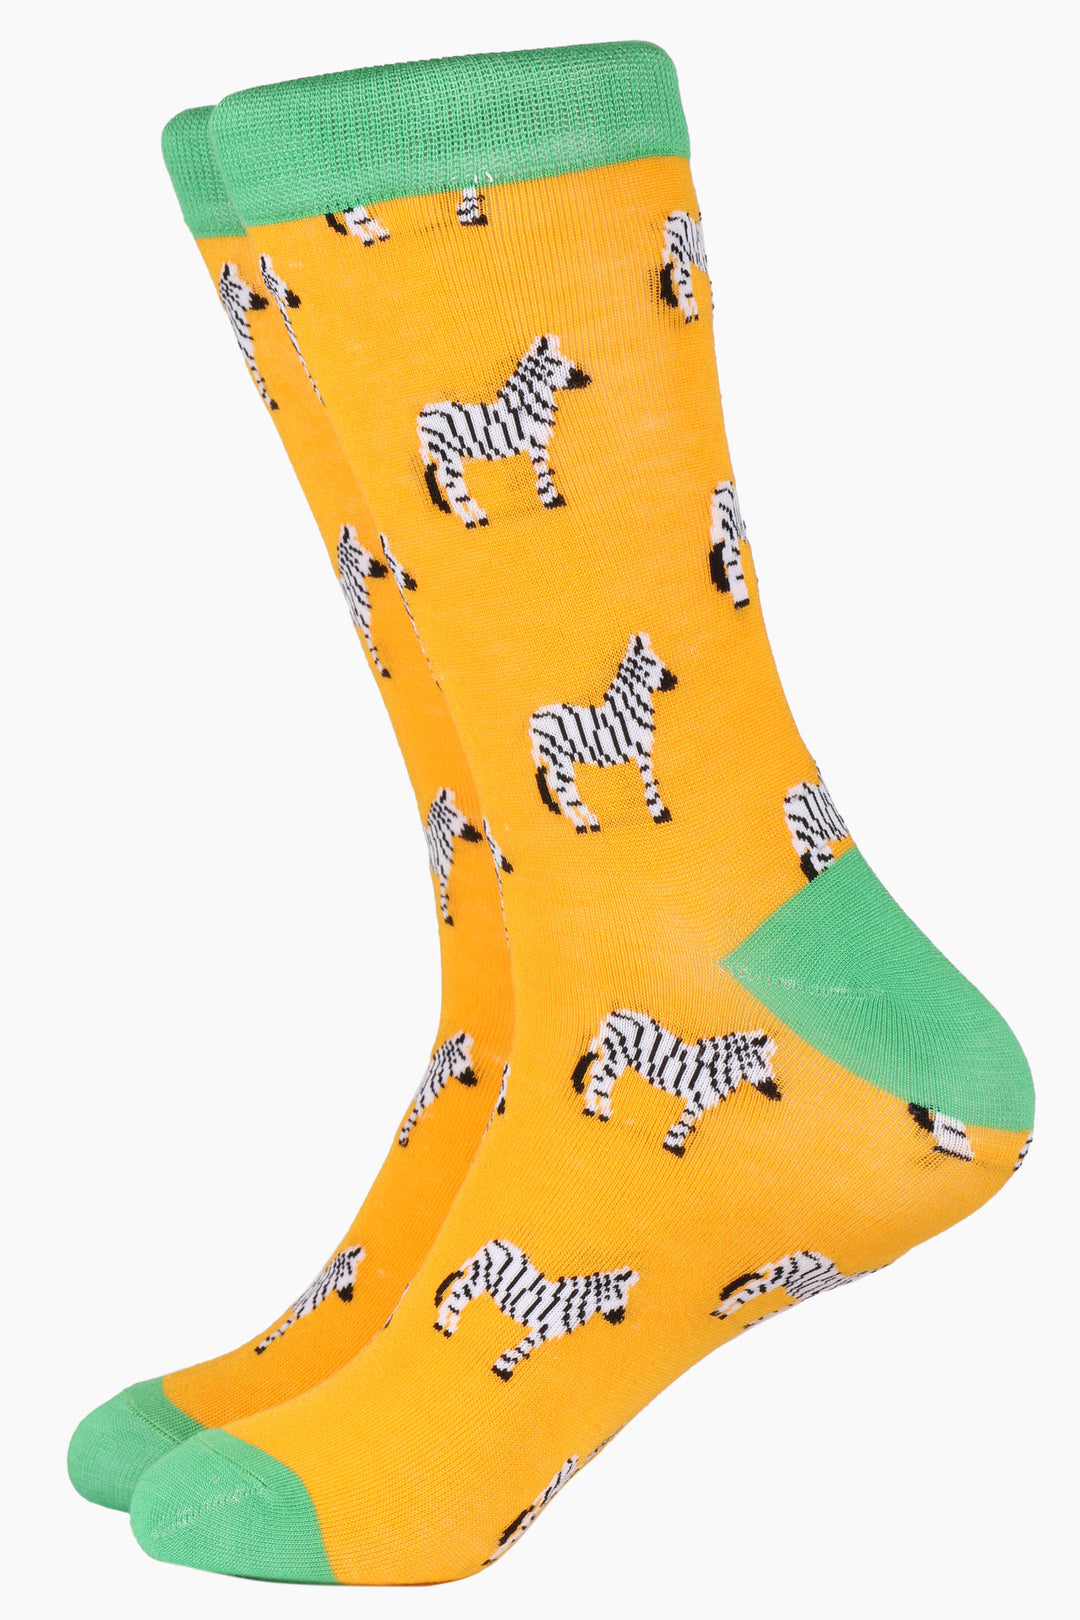 yellow bamboo socks with green toe, heel and cuff with an all over pattern of black and white zebras